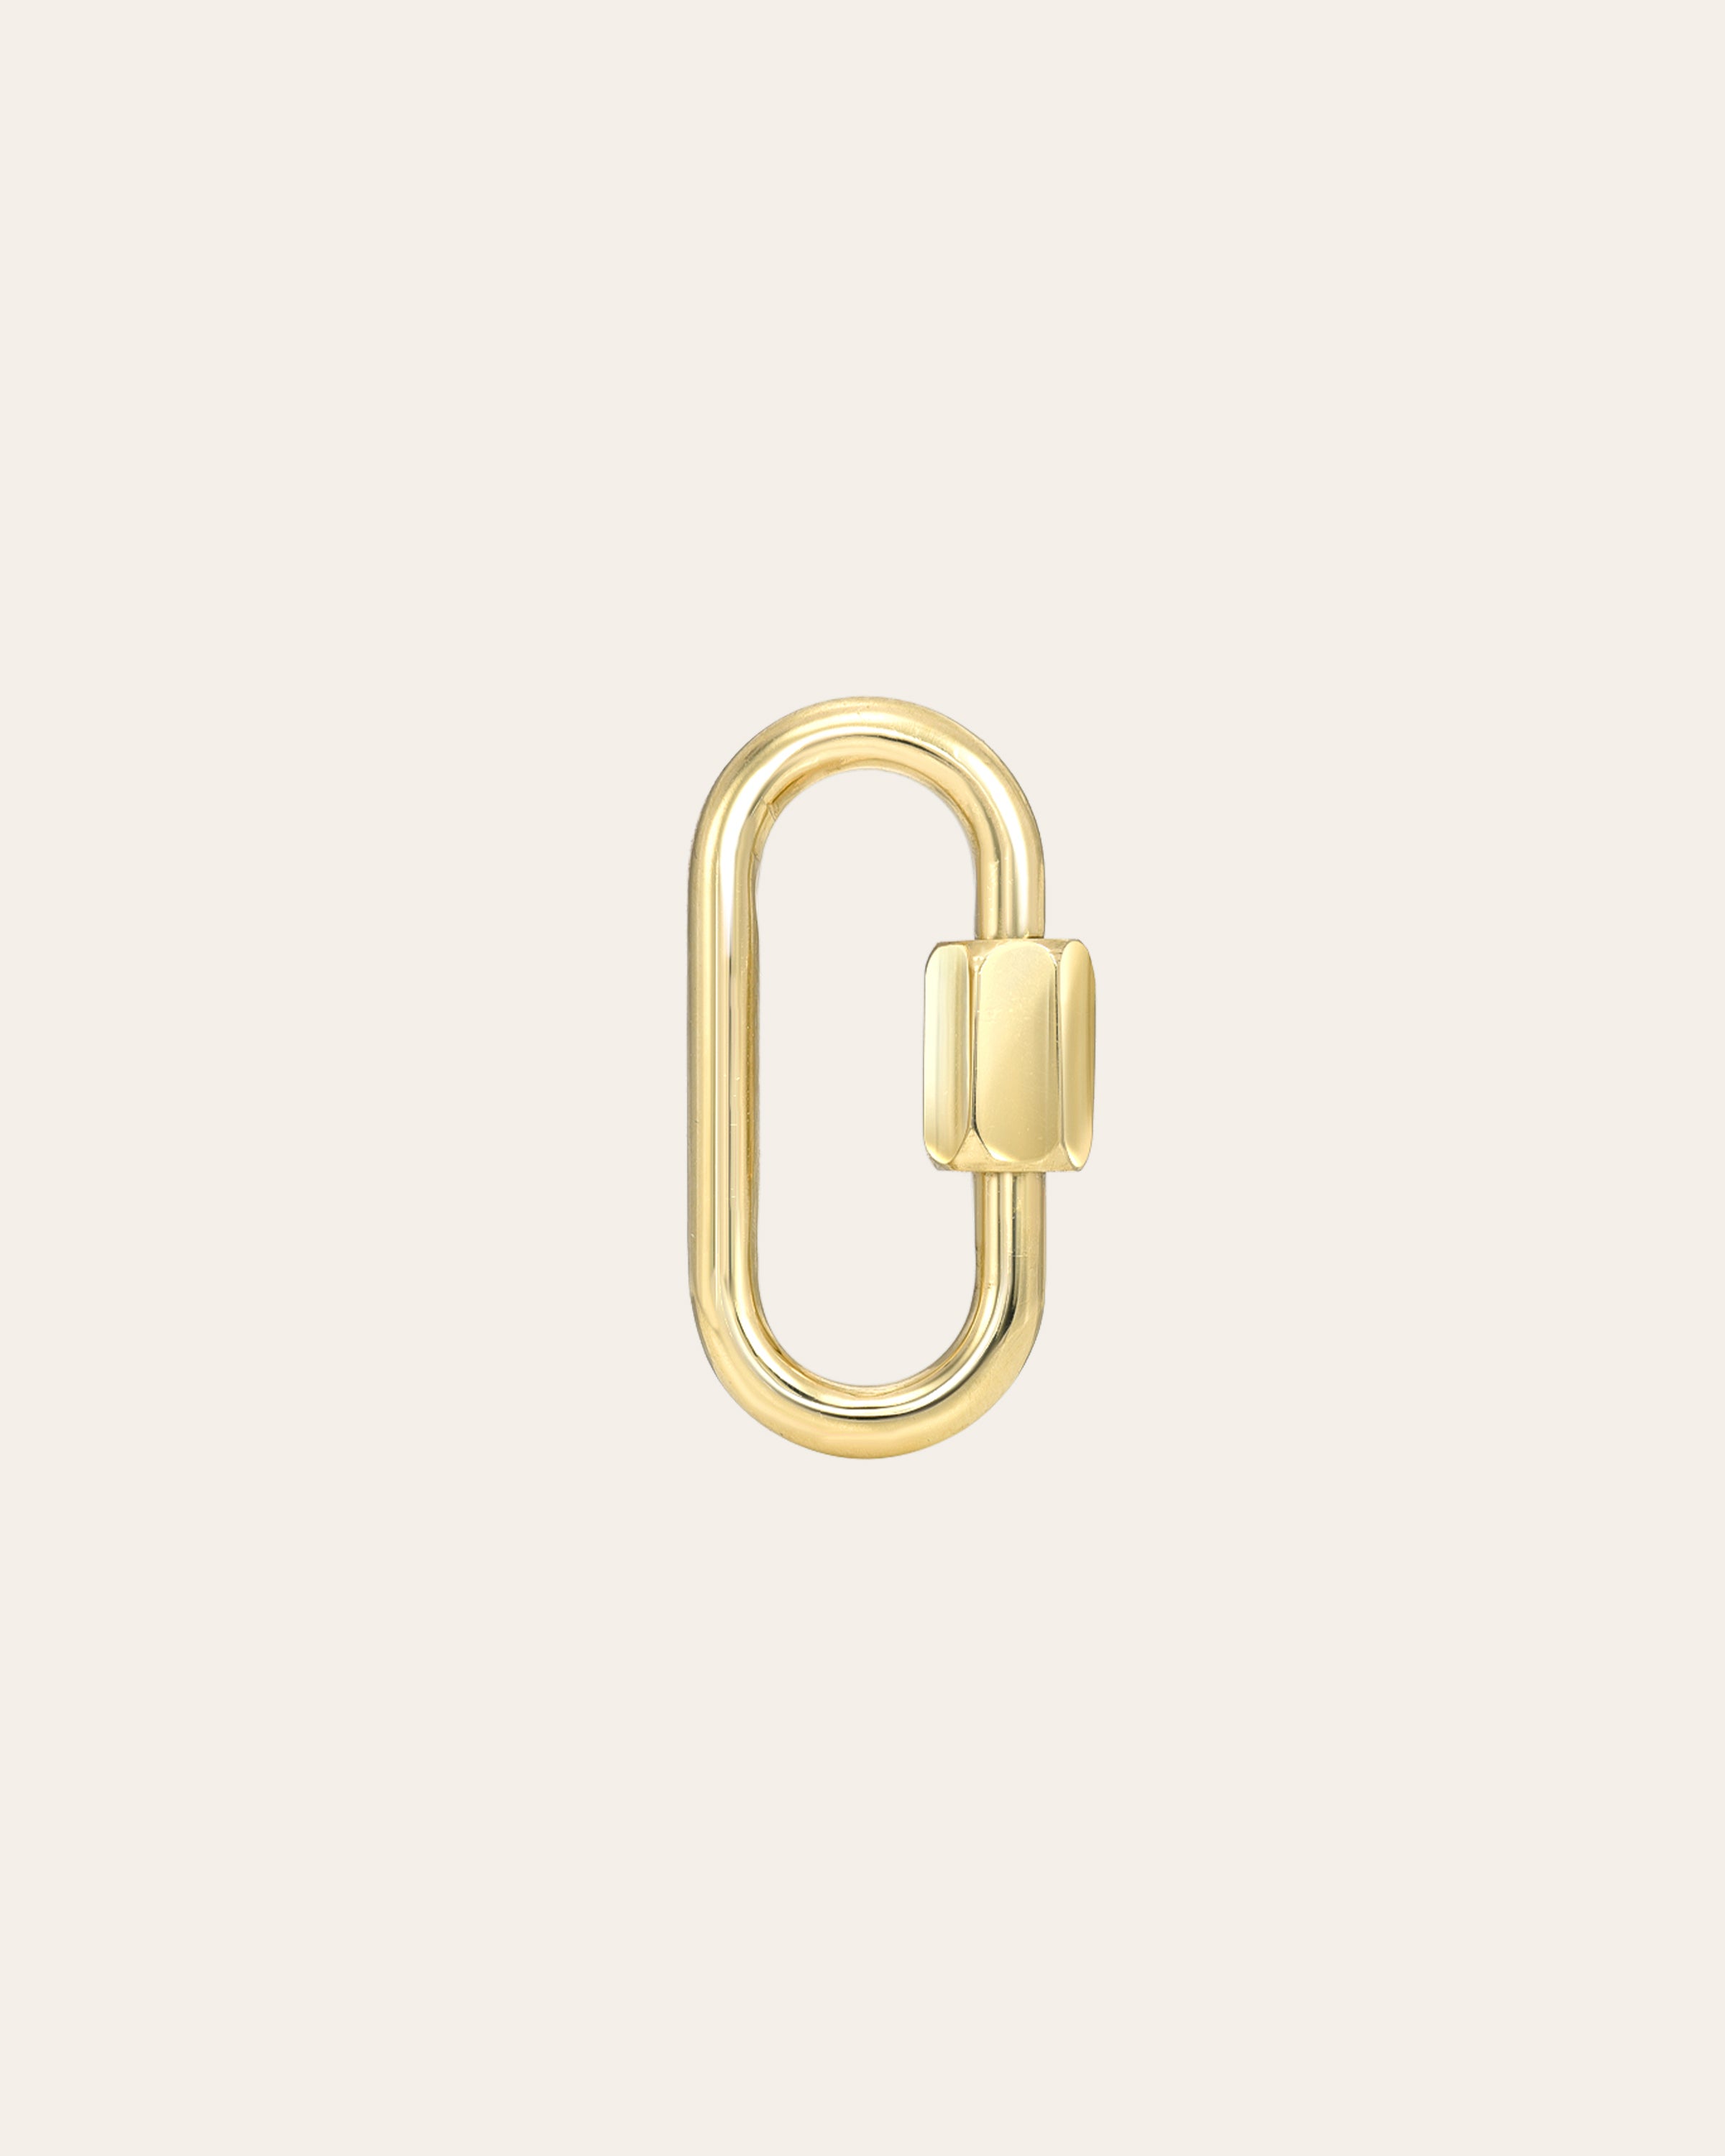 14k Yellow Gold Carabiner Clasp Lock Connector Pendant Charm